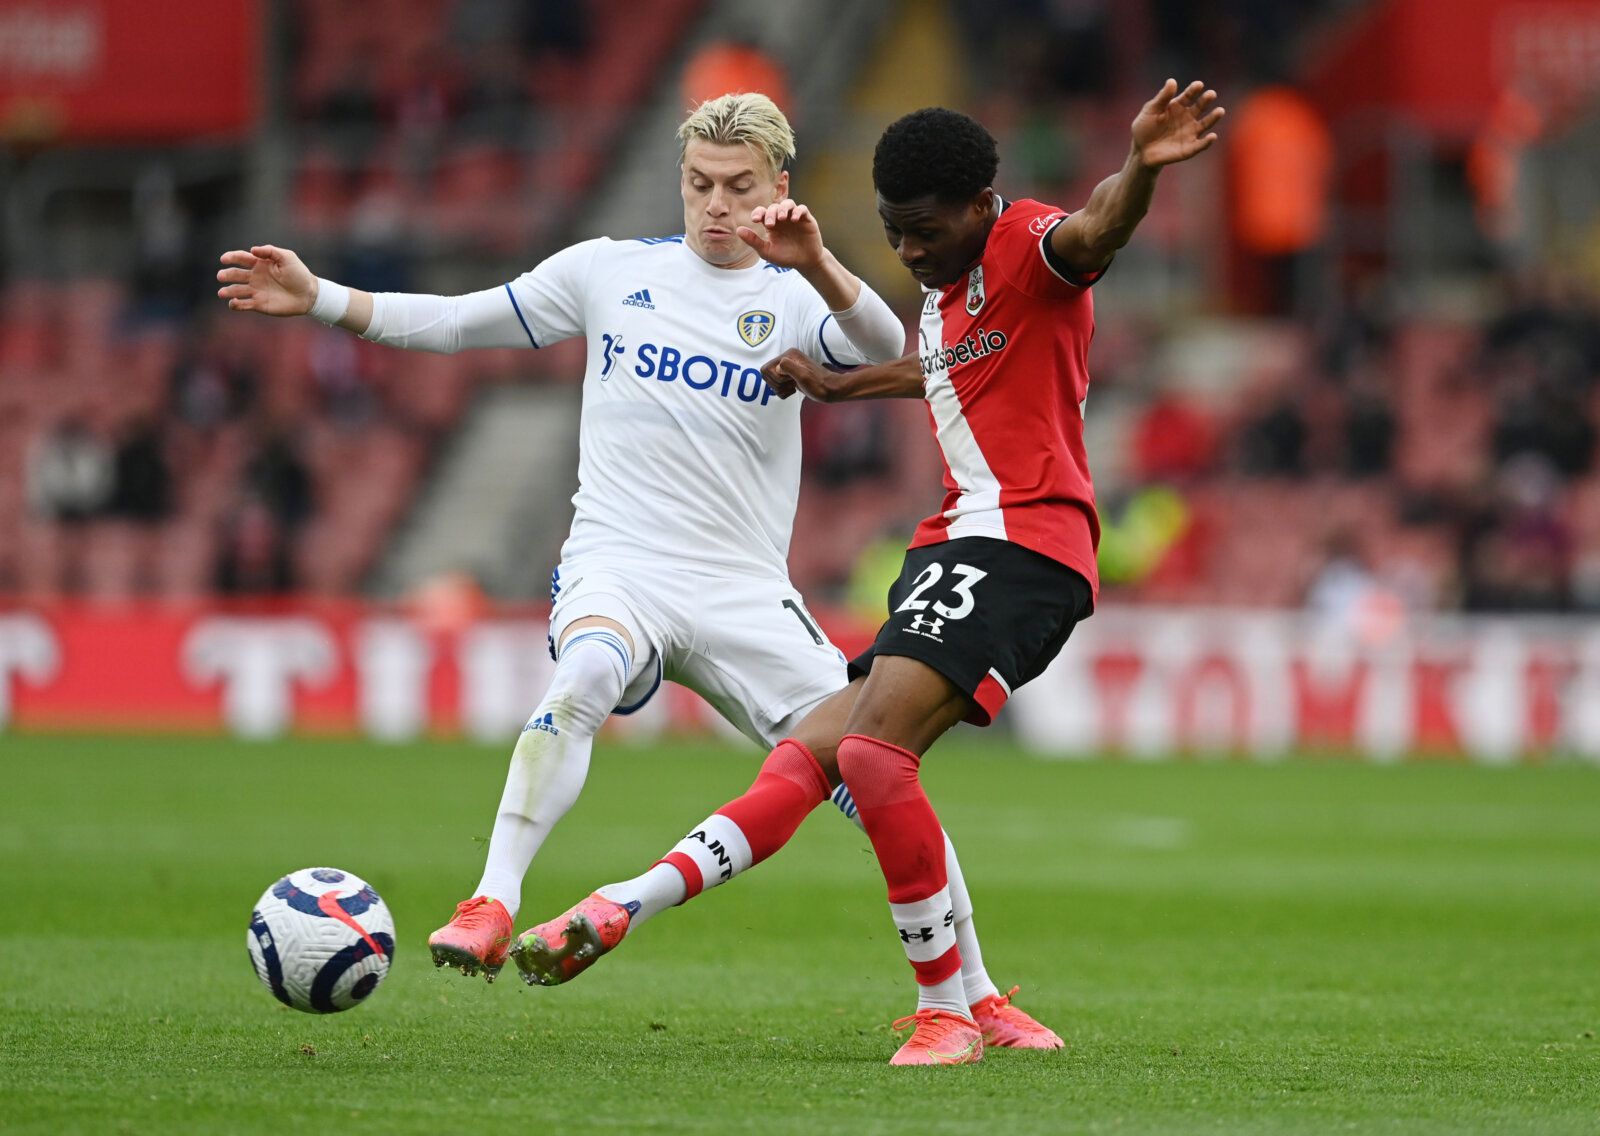 Soccer Football - Premier League -  Southampton v Leeds United - St Mary's Stadium, Southampton, Britain - May 18, 2021 Leeds United's Ezgjan Alioski in action with Southampton's Nathan Tella Pool via REUTERS/Neil Hall EDITORIAL USE ONLY. No use with unauthorized audio, video, data, fixture lists, club/league logos or 'live' services. Online in-match use limited to 75 images, no video emulation. No use in betting, games or single club /league/player publications.  Please contact your account rep